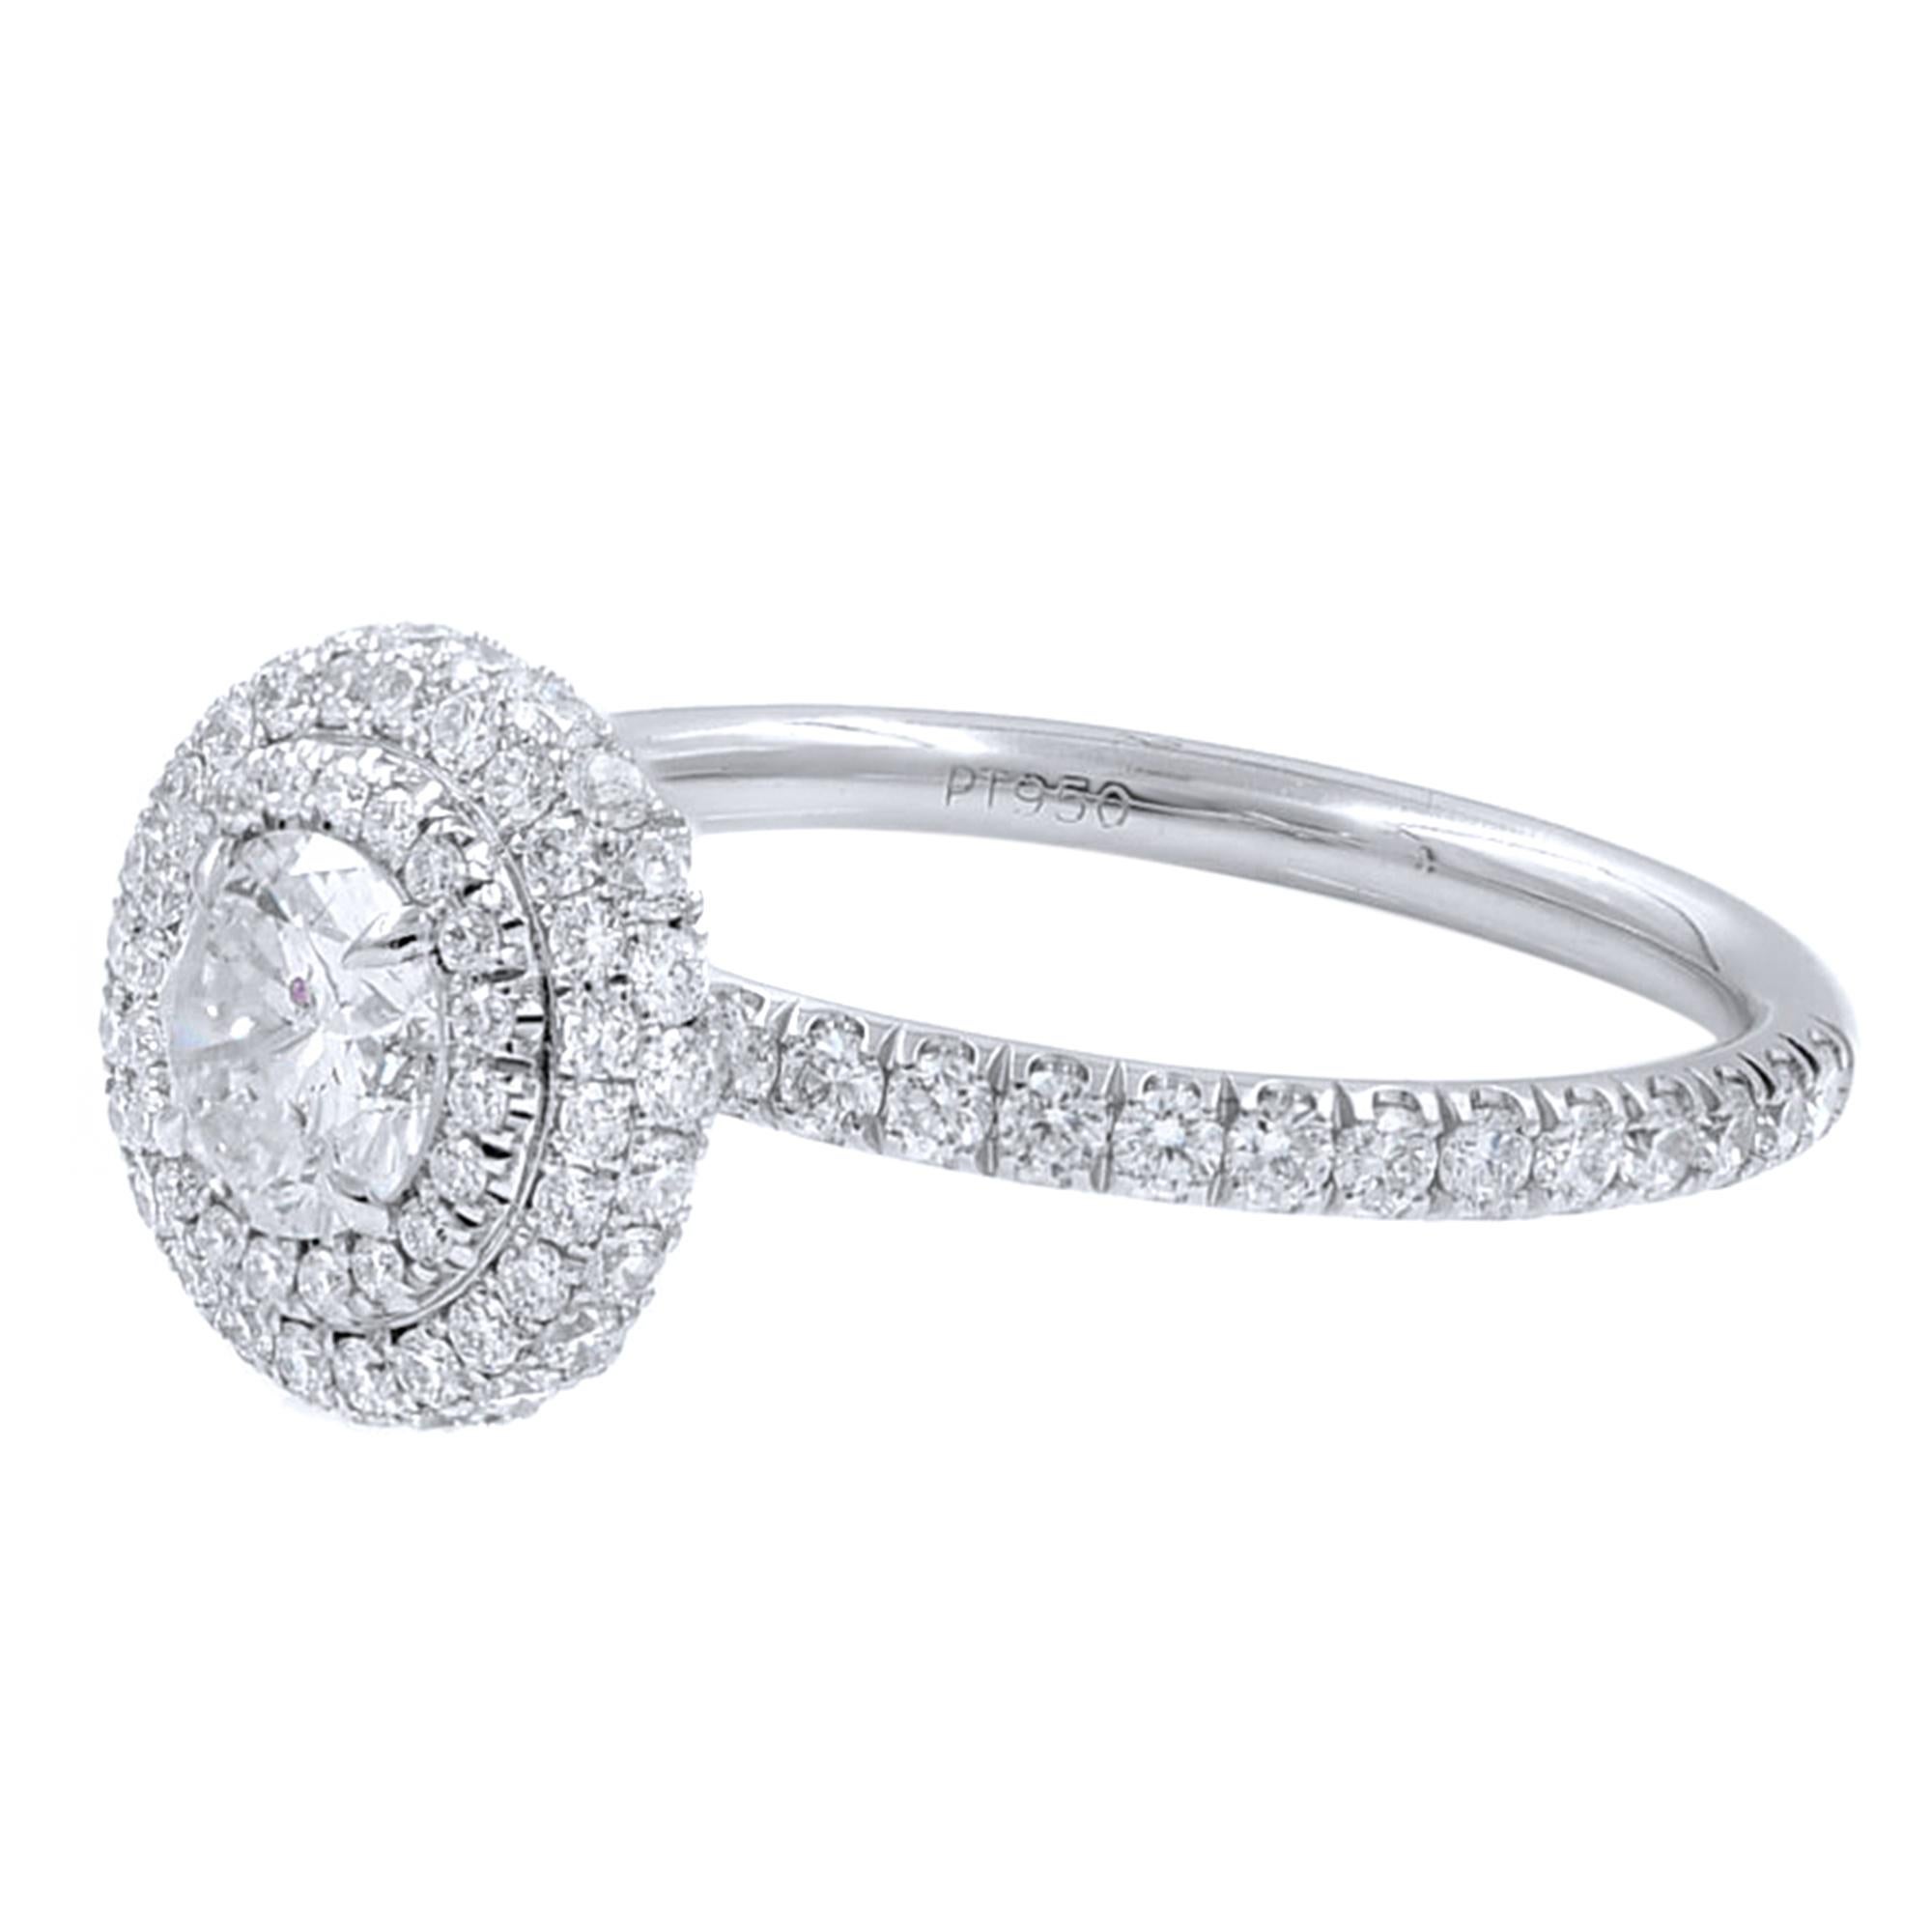 This is handmade one of a kind diamond engagement ring crafted in Platinum.
Currently this ring is size: 6.5
Can be sized up or down.

Talk about statement and luxury! This ring is all sparkle and shine yet classy to wear every day without looking